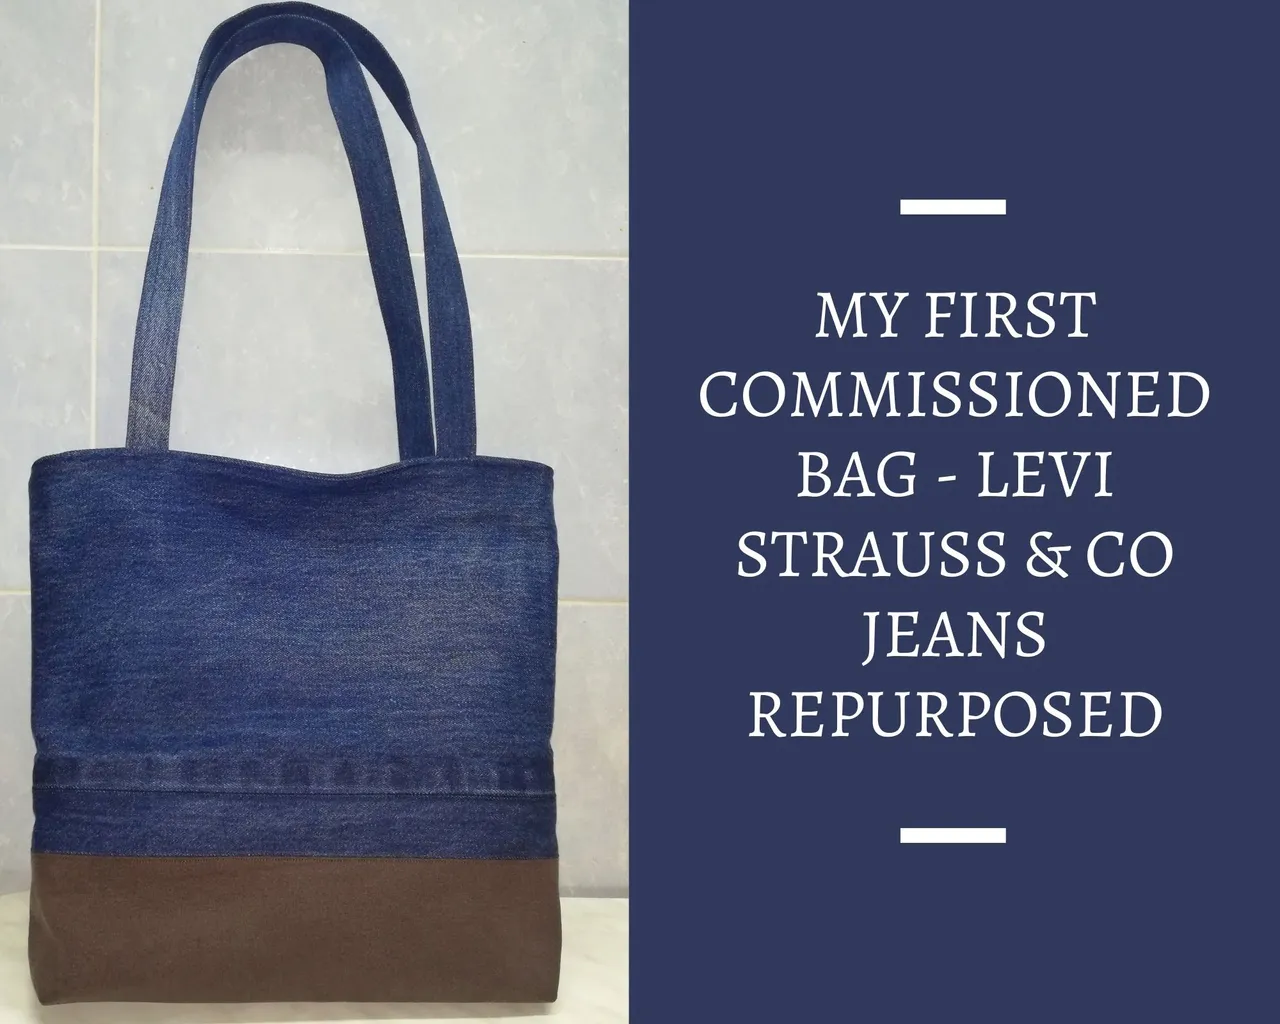 My First Commissioned Bag - Levi Strauss & Co Jeans Repurposed.jpg